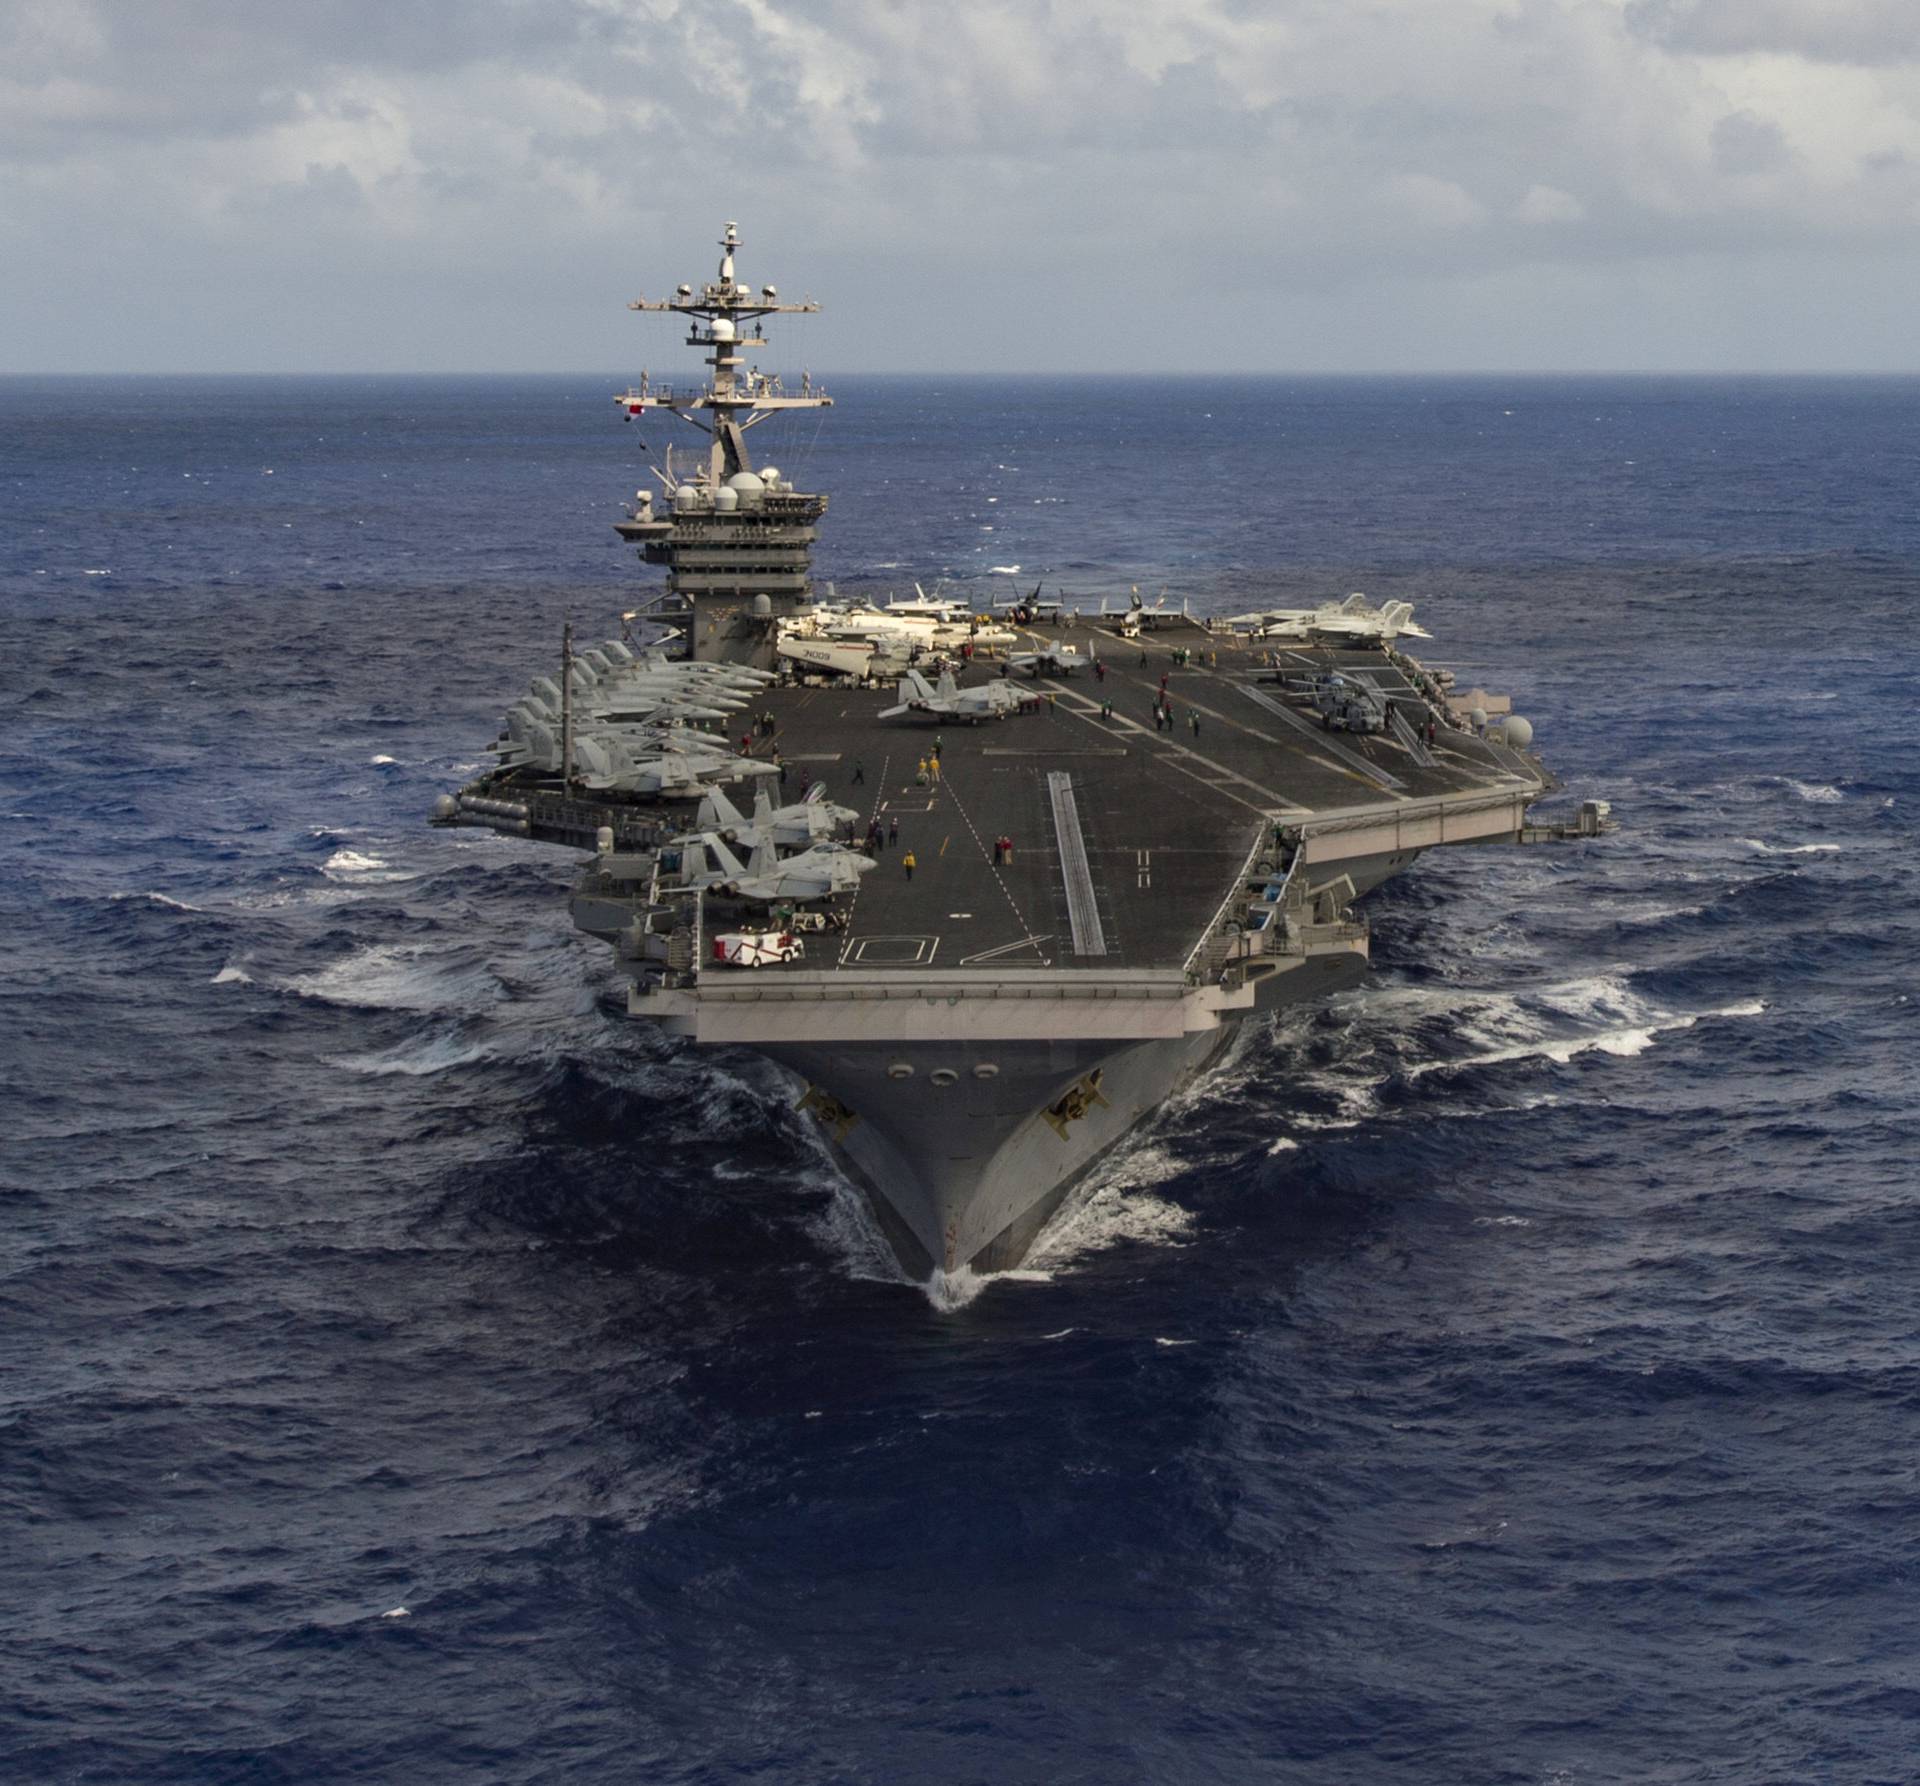 FILE PHOTO - The aircraft carrier USS Carl Vinson (CVN 70) transits the Pacific Ocean